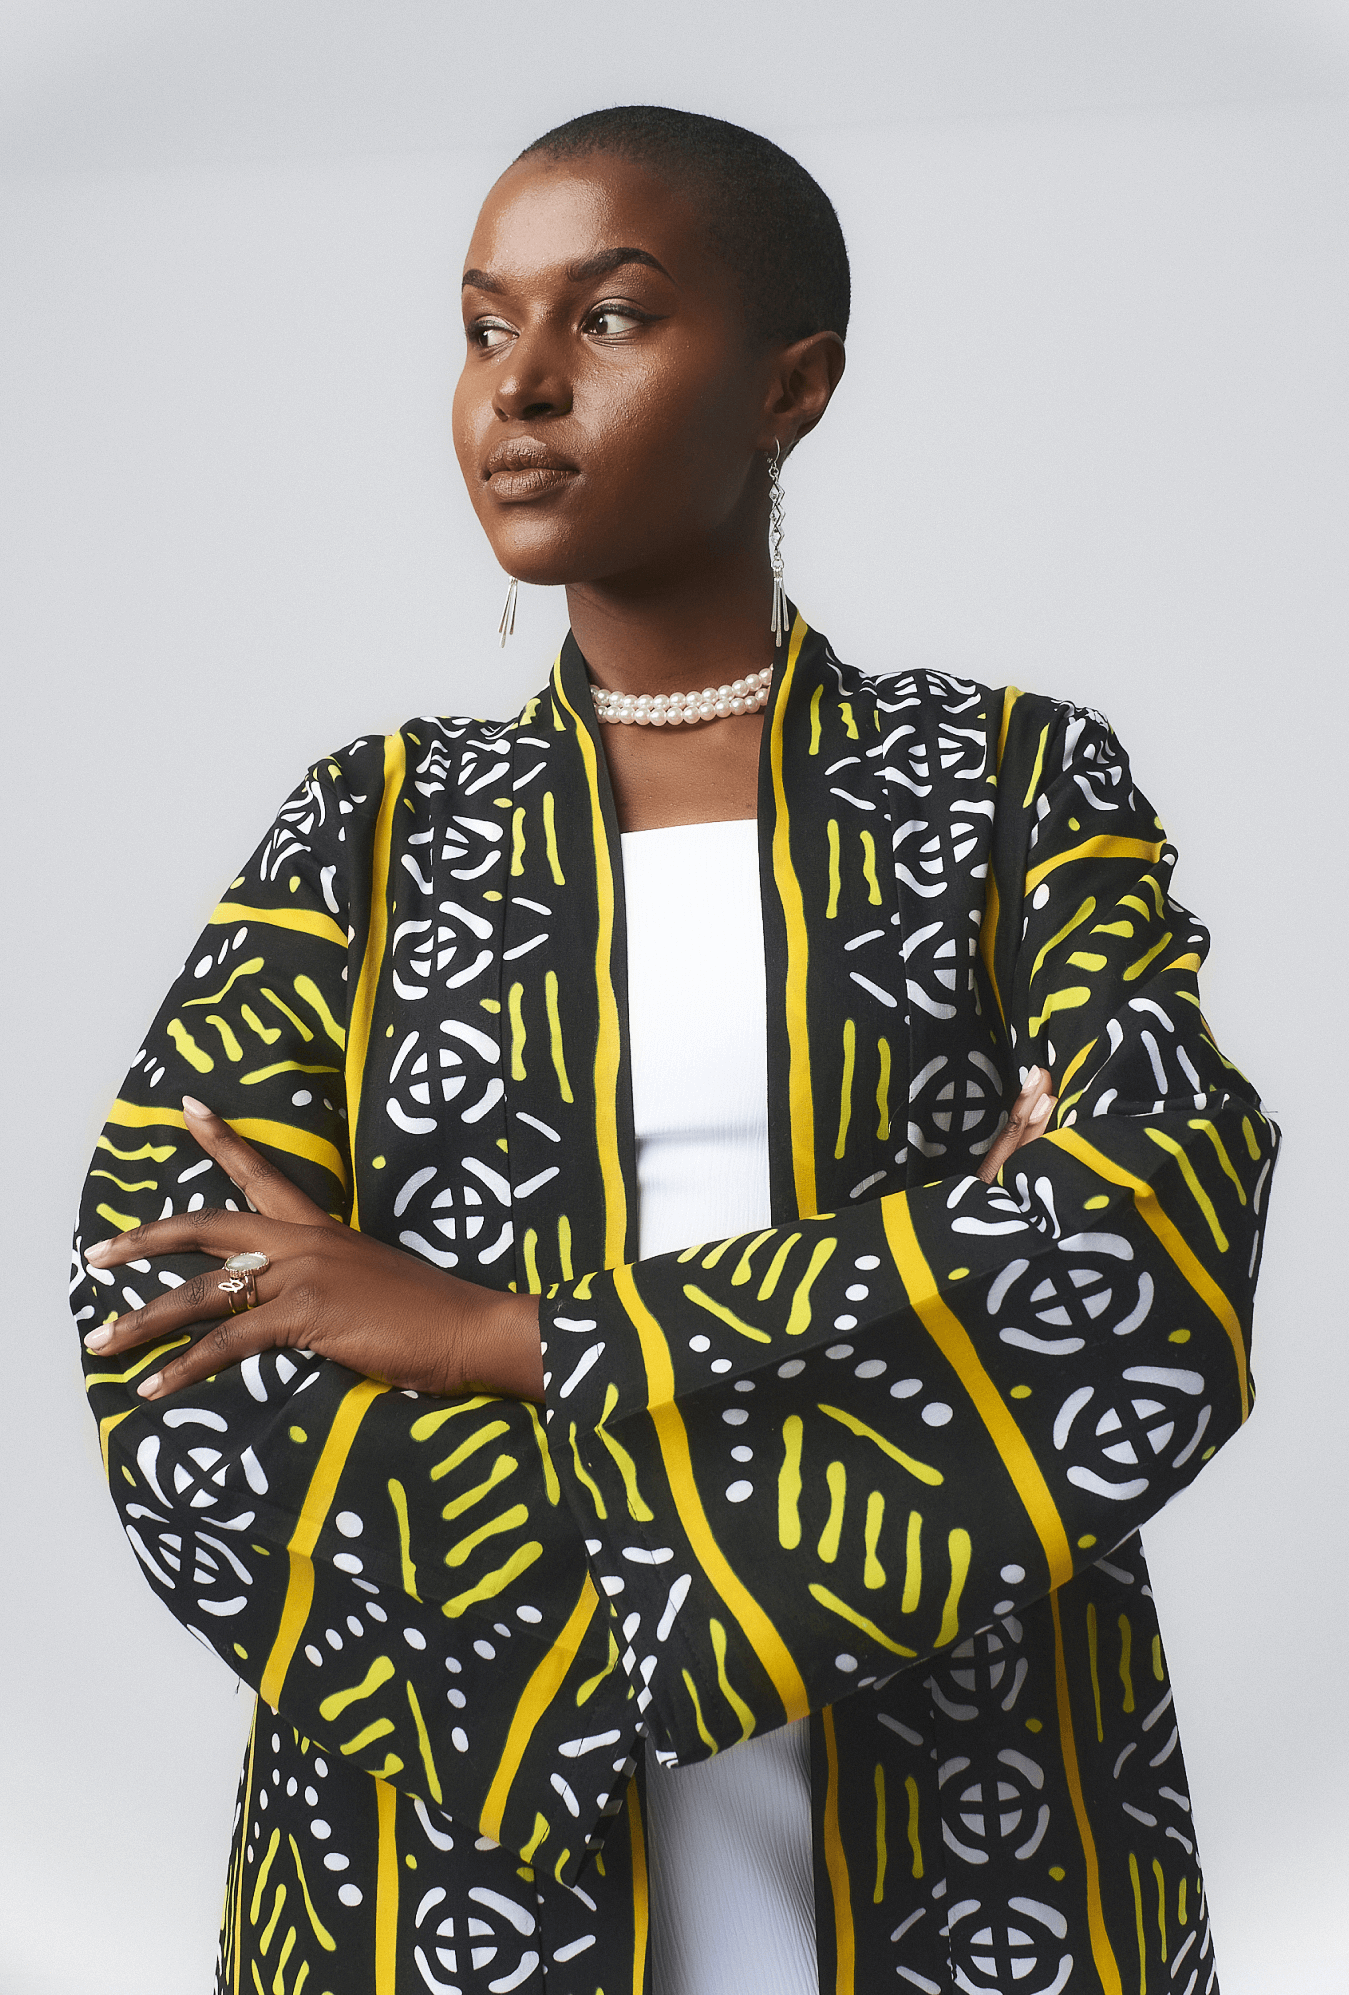 Shop the Cyami Apparel Collection on Arrai. Discover stylish, affordable clothing, jewelry, handbags and unique handmade pieces from top Kenyan & African fashion brands prioritising sustainability and quality craftsmanship. Shop Fashion online on Arrai.sh